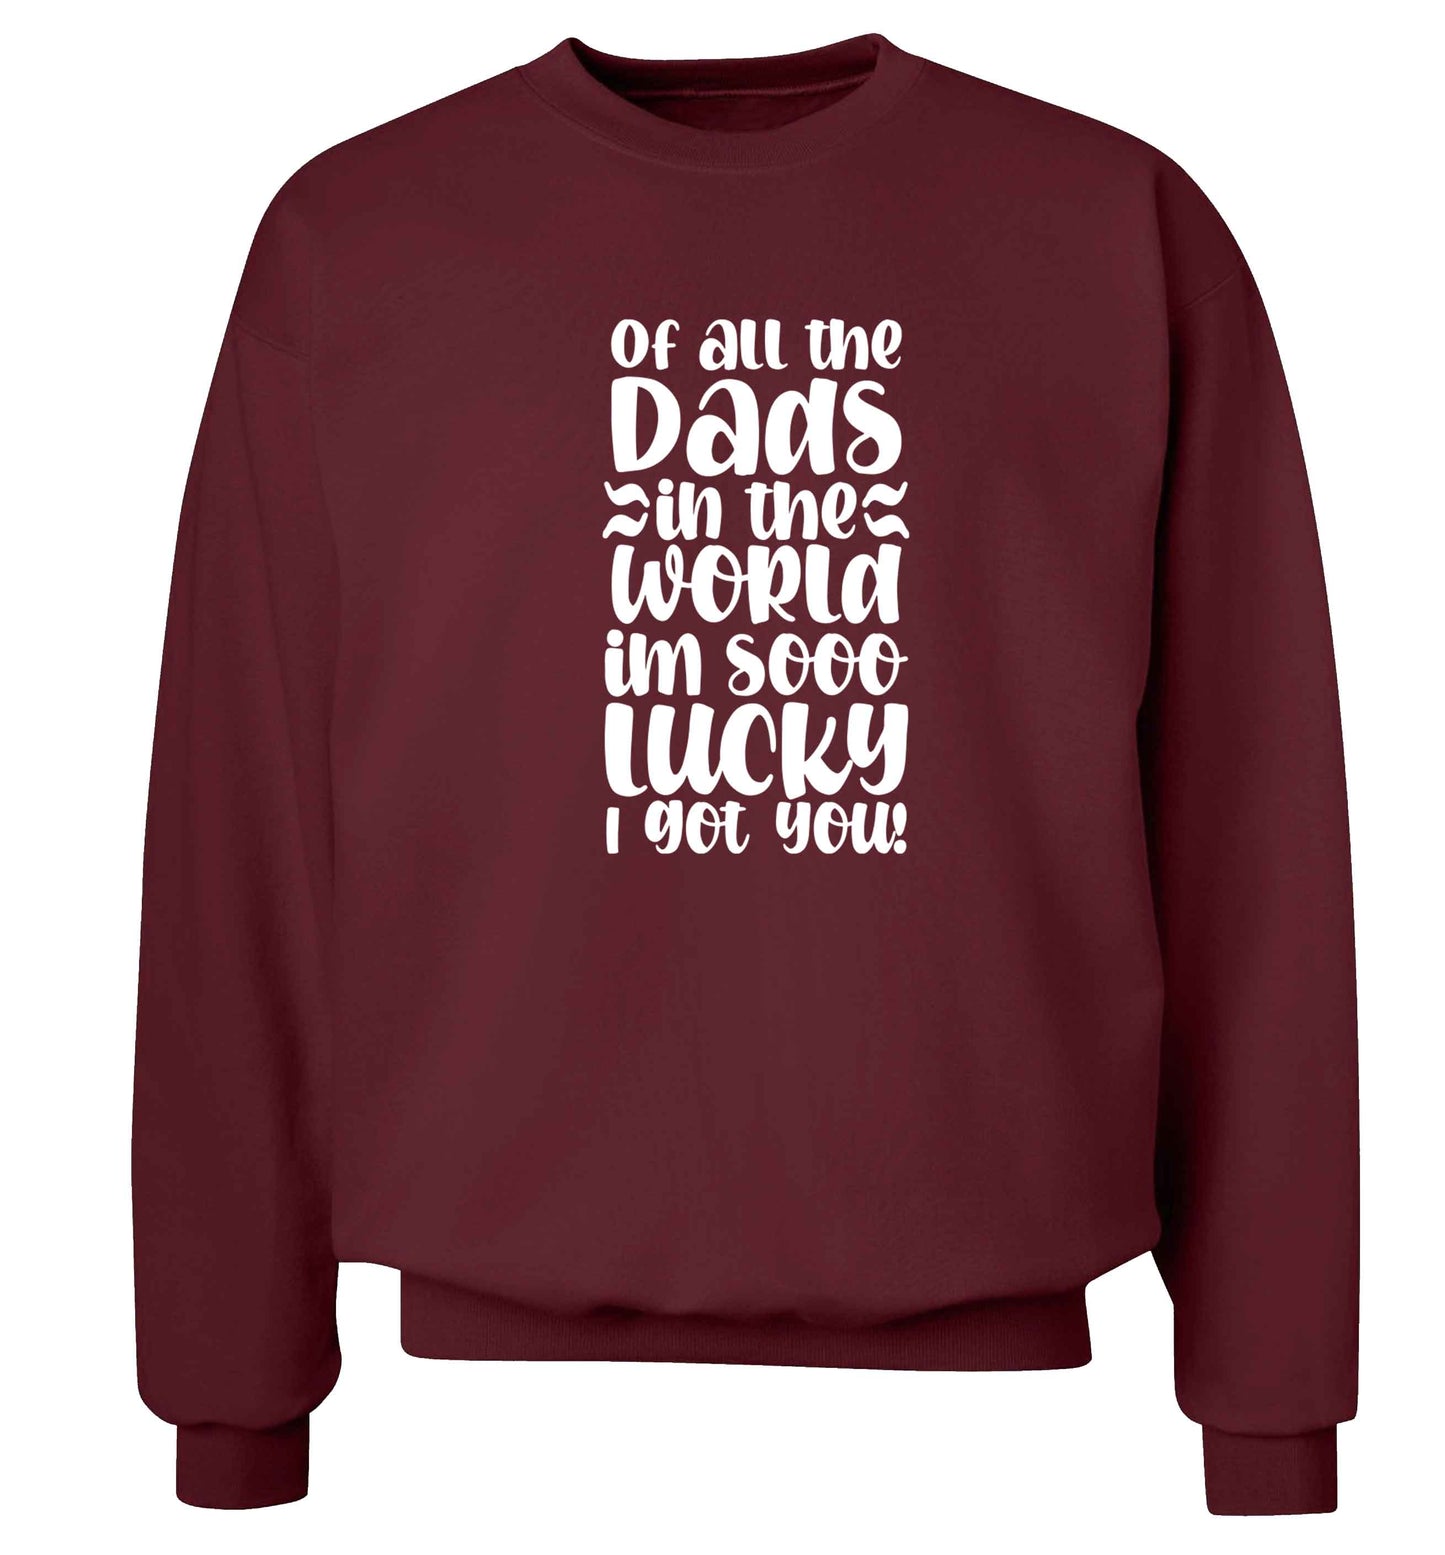 Of all the Dads in the world I'm so lucky I got you adult's unisex maroon sweater 2XL